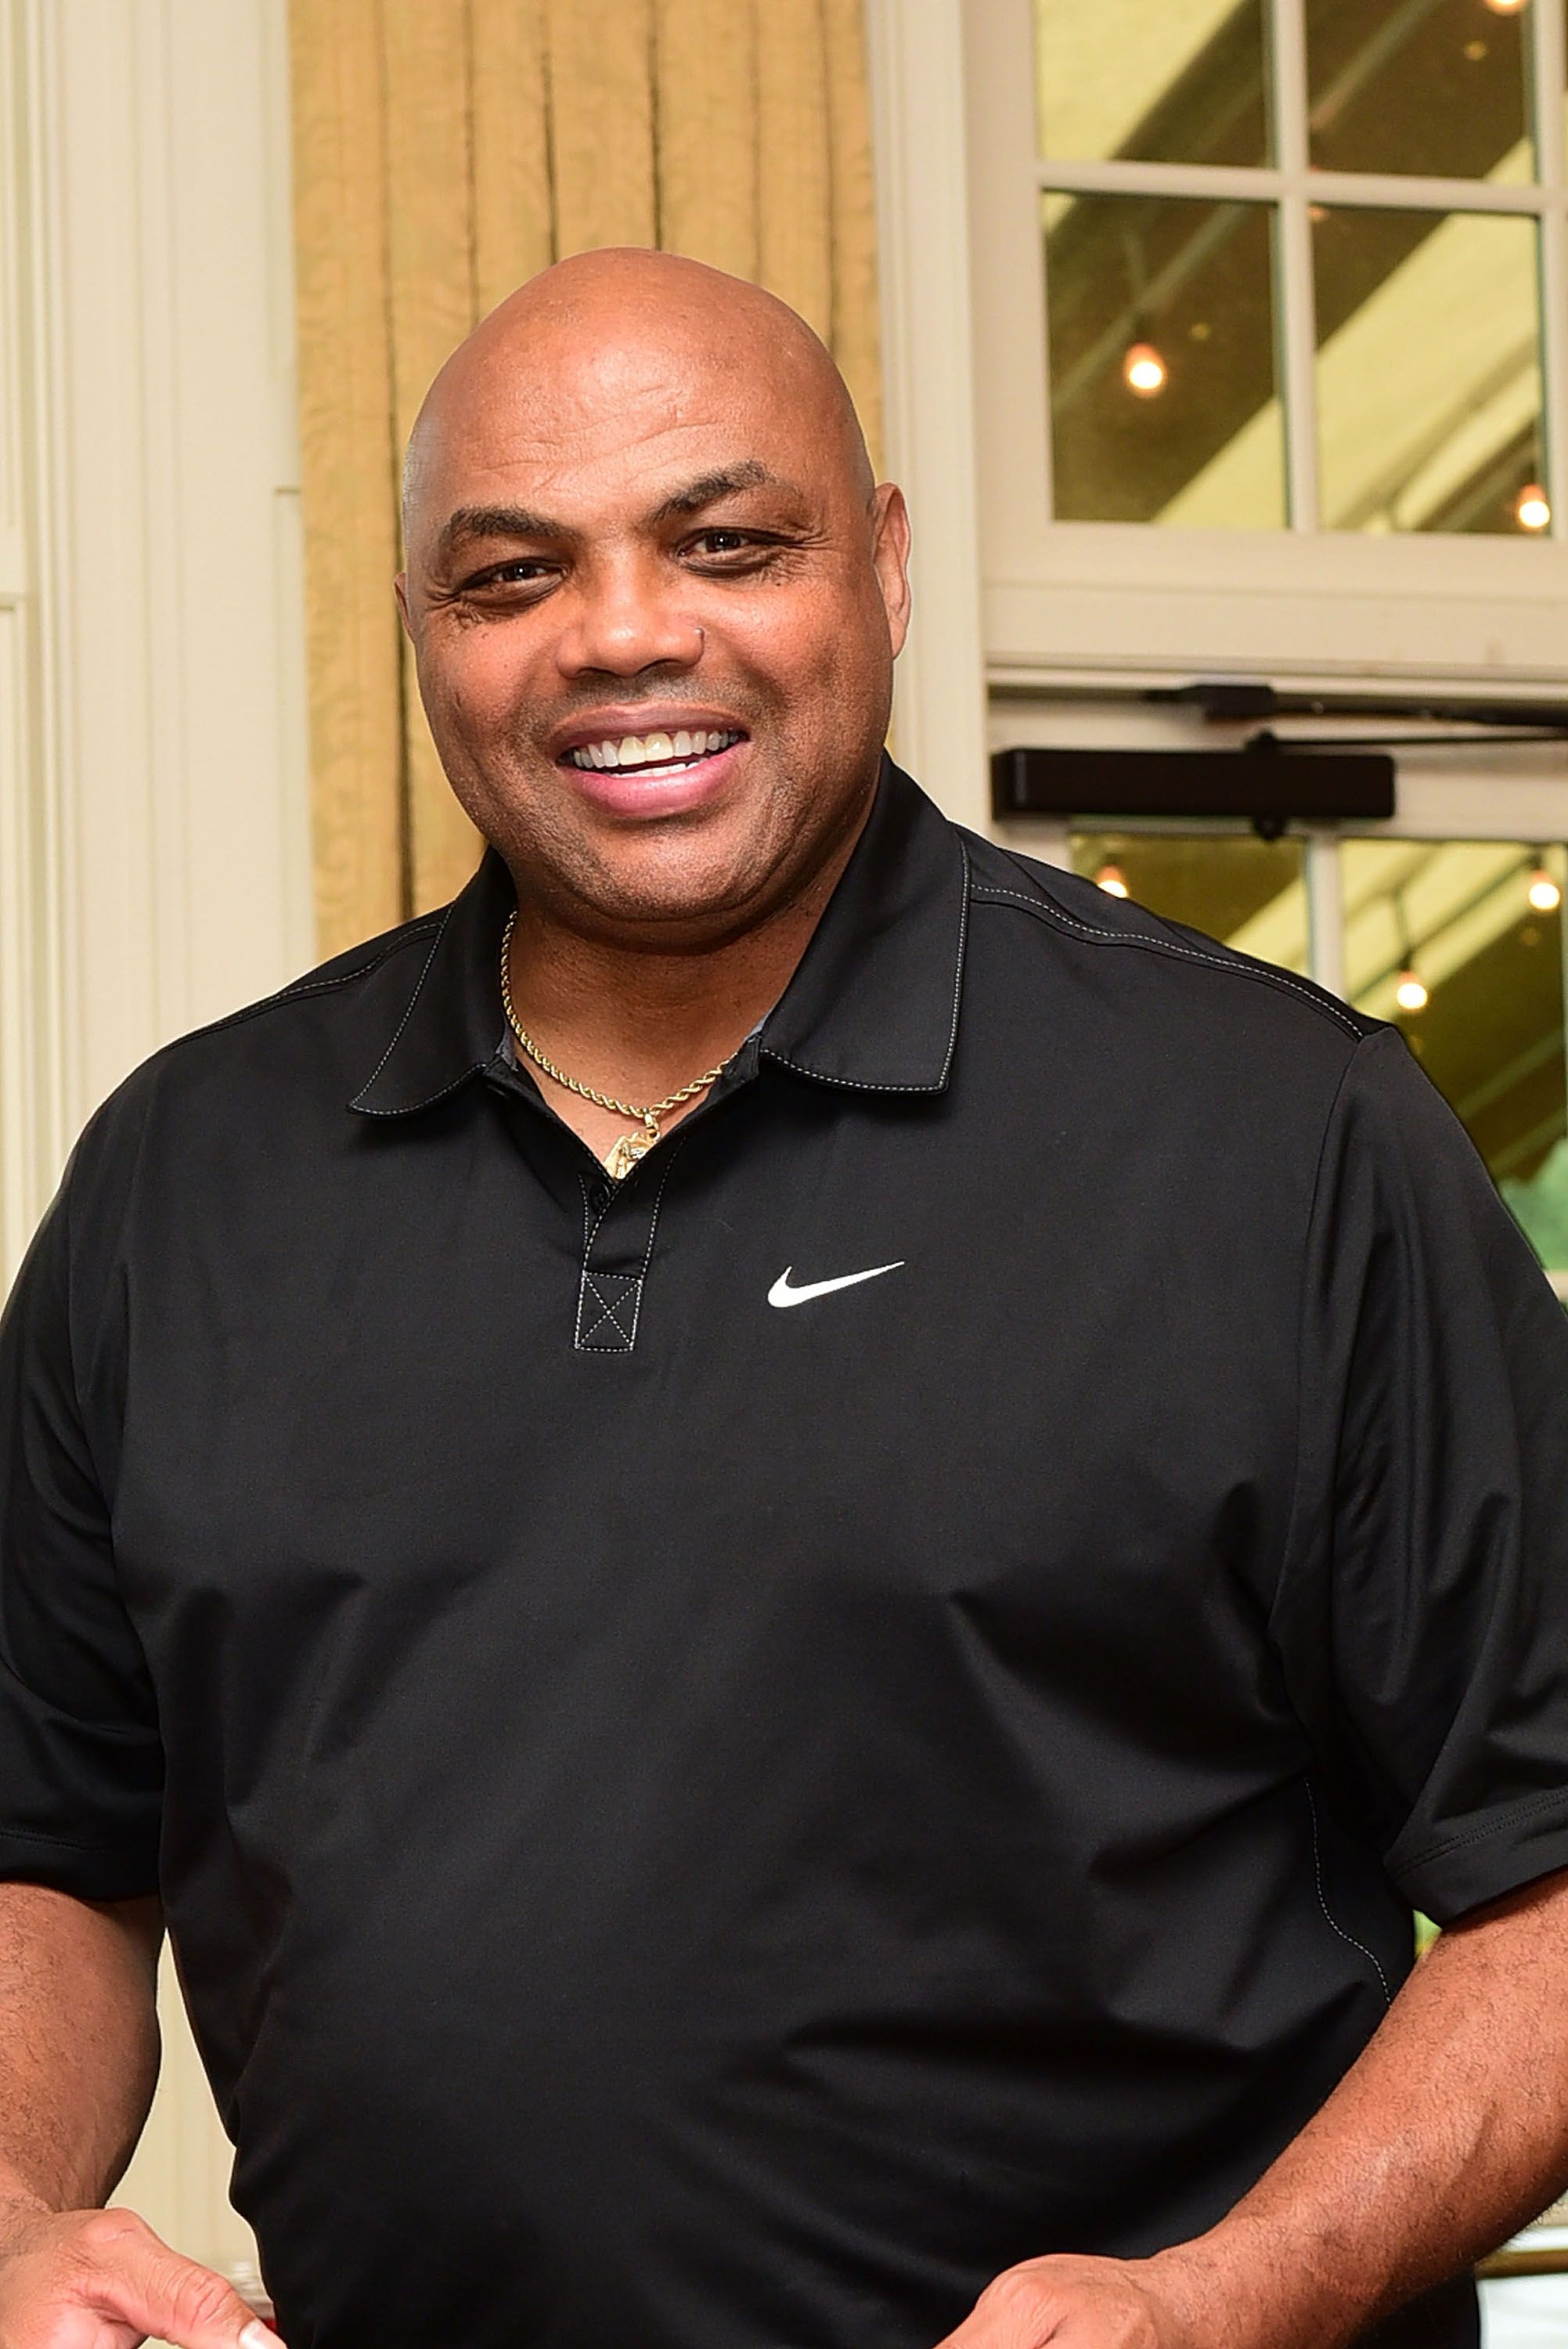 Charles Barkley at Edgewood Tahoe Golf Course in Nevada in July 11, 2019/ Source: Getty Images